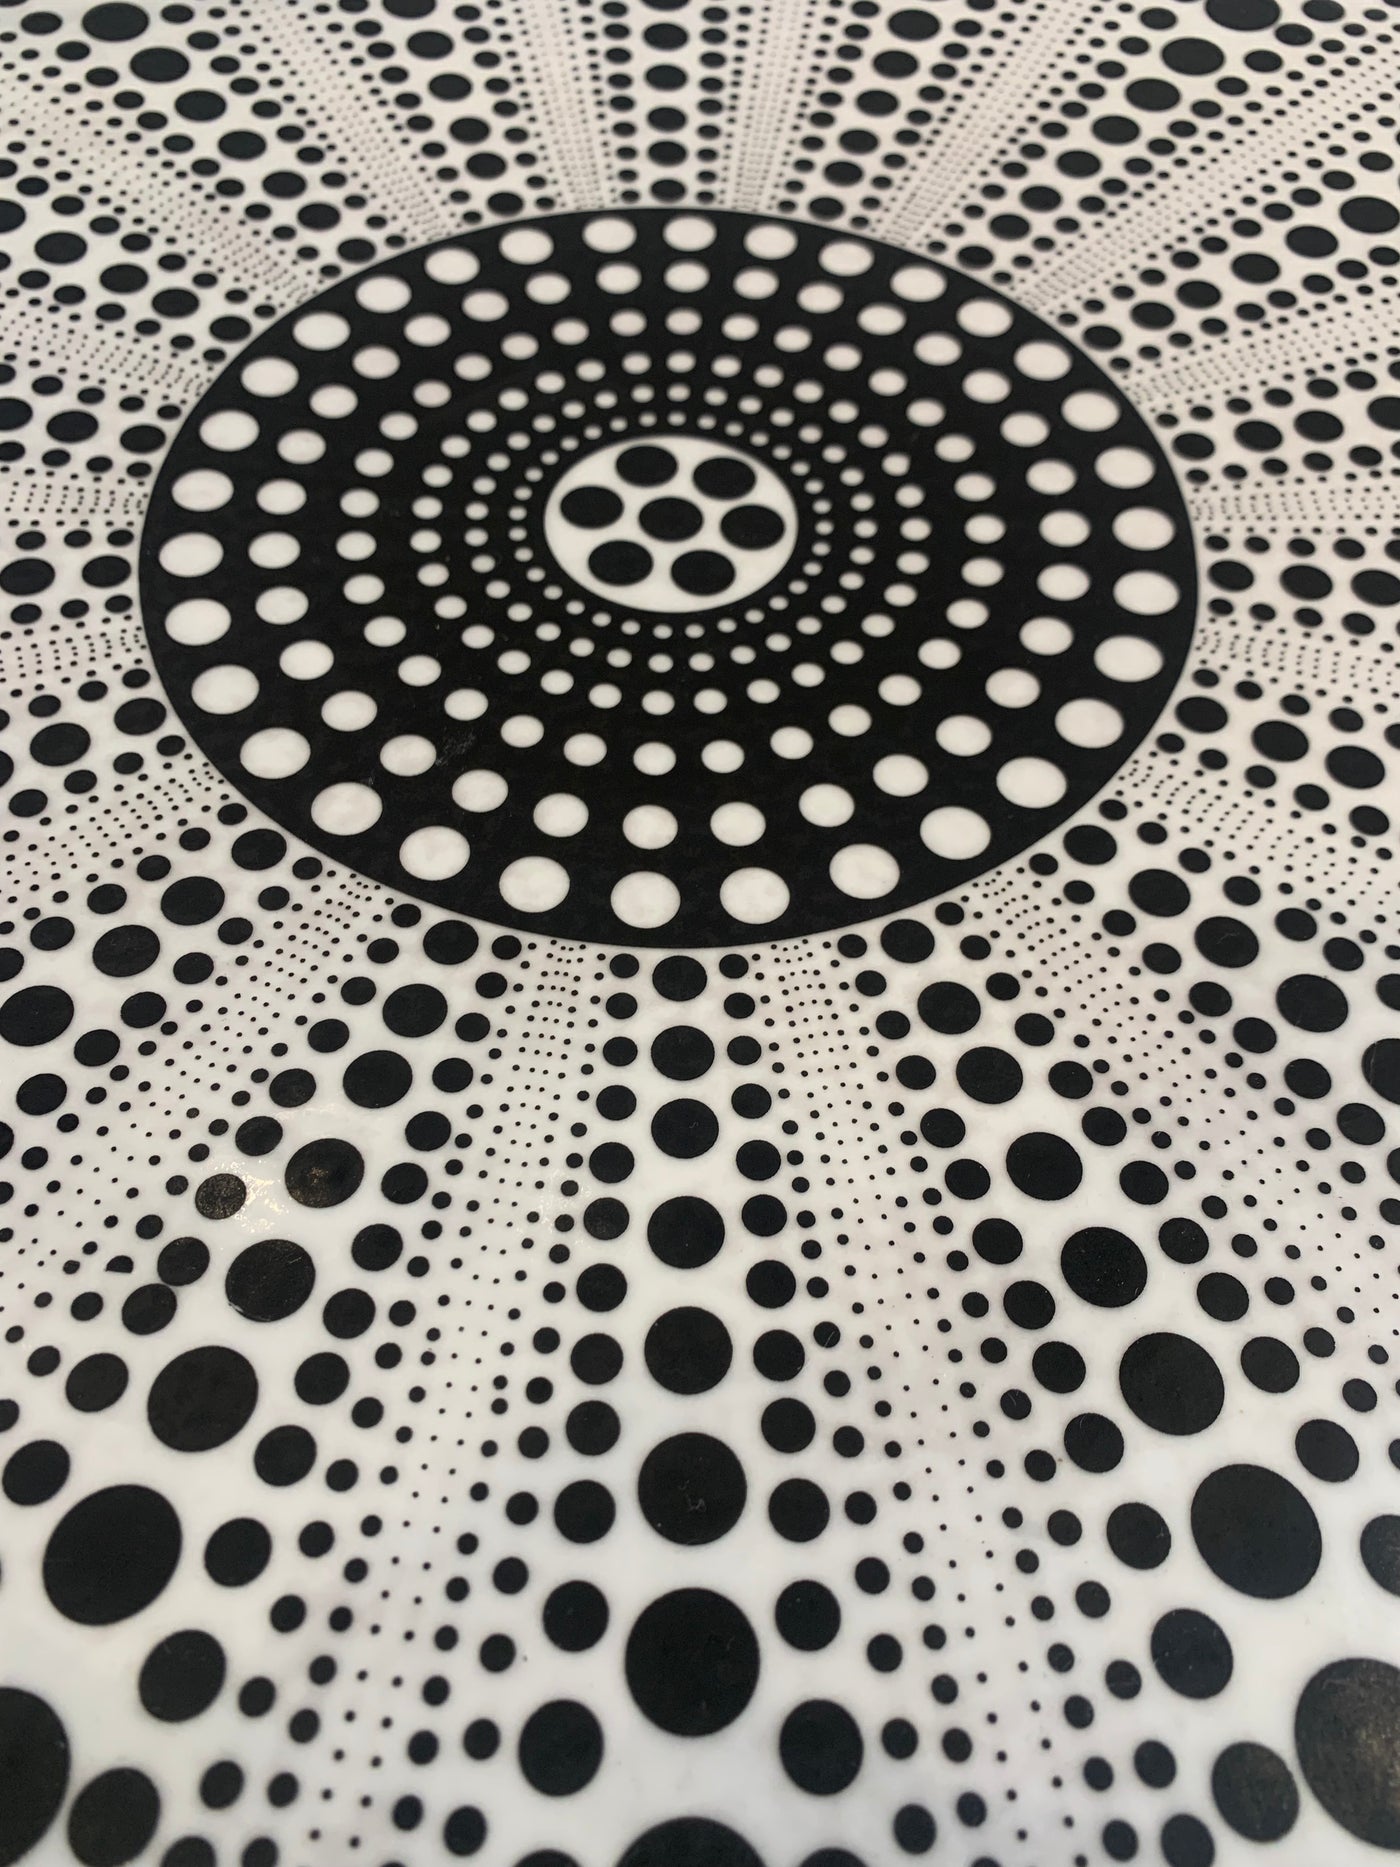 TABLE BLACK & WHITE HAND PAINTED PORCELAIN